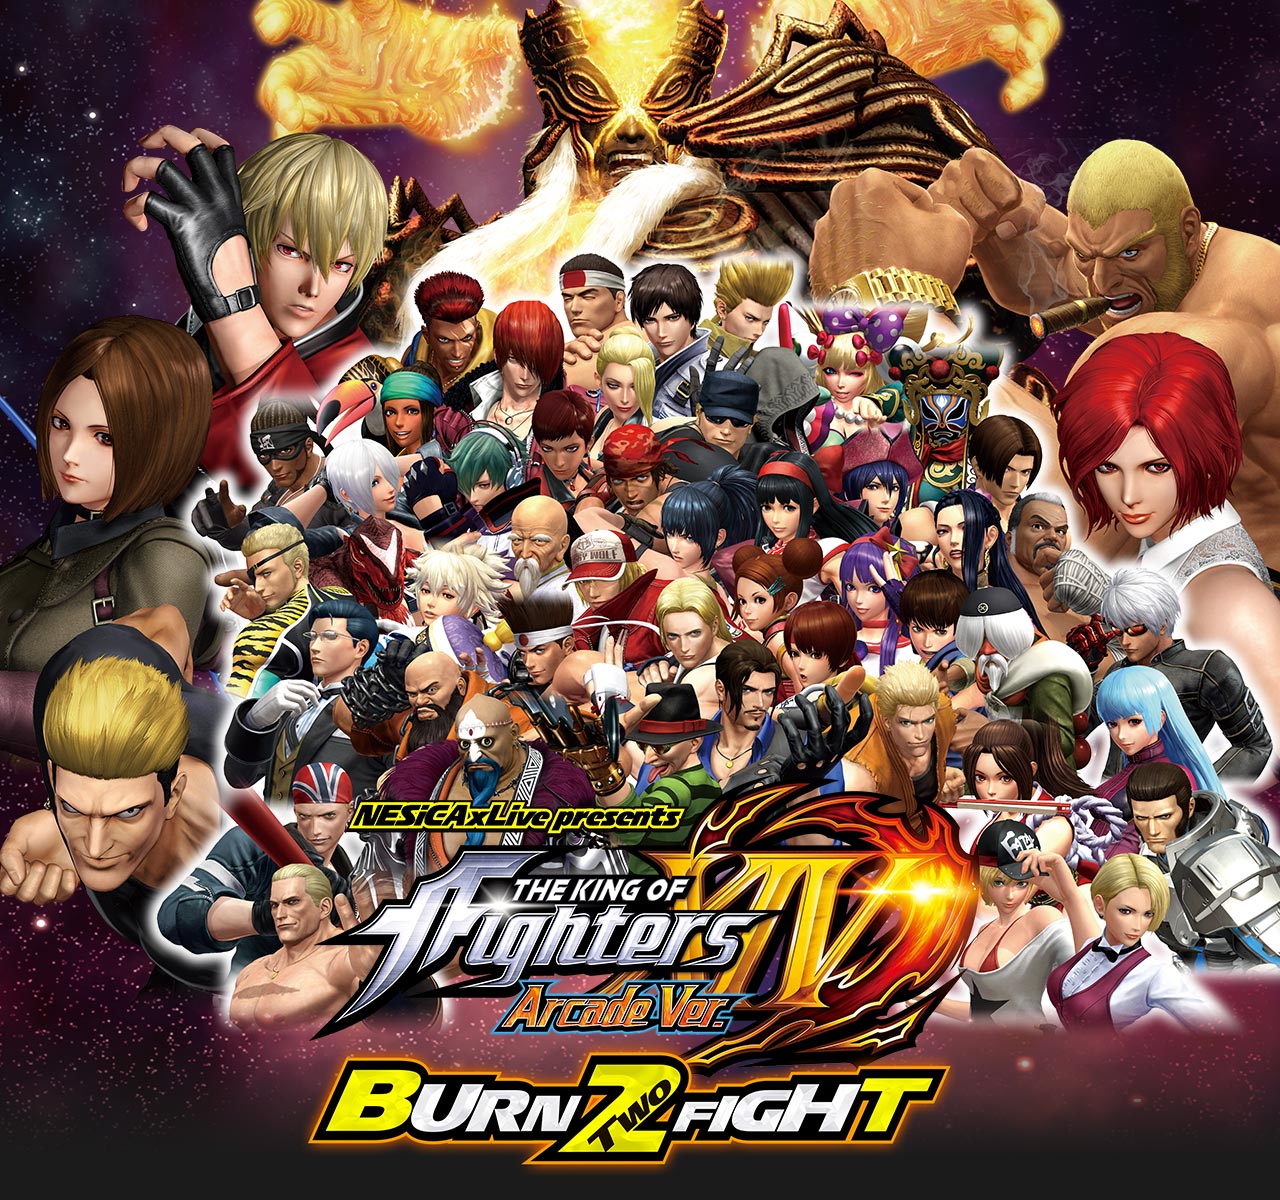 Nesicaxlive Presents The King Of Fighters Xiv Arcade Ver Burn Two Fight18 株式会社タイトー アーケードゲーム